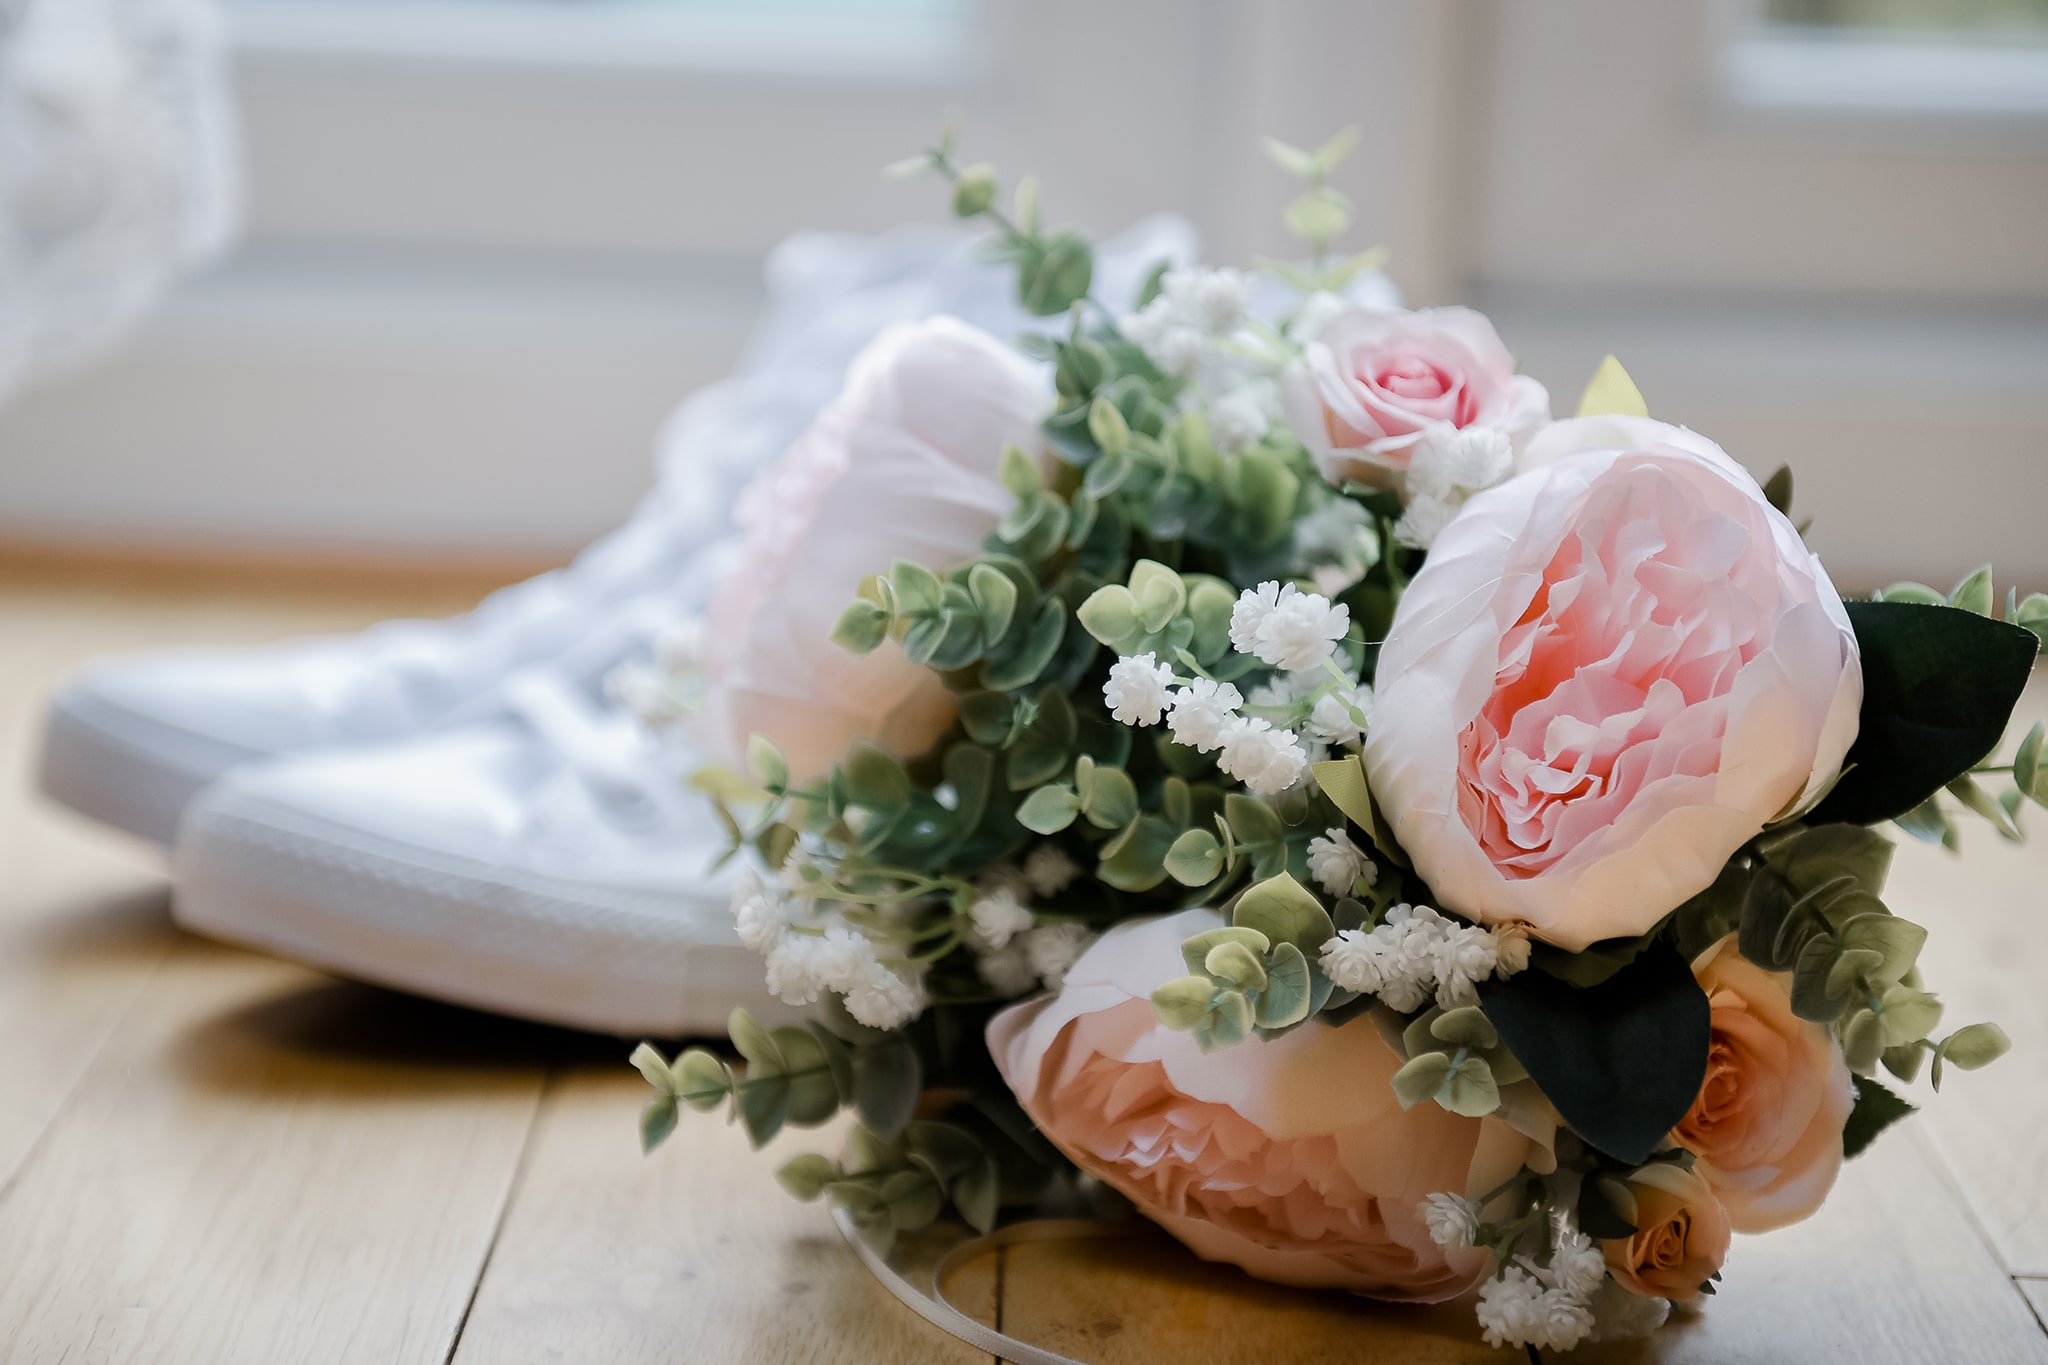 White Converse wedding trainers and brides matching flower bouquet, placed on natural timber floorboards